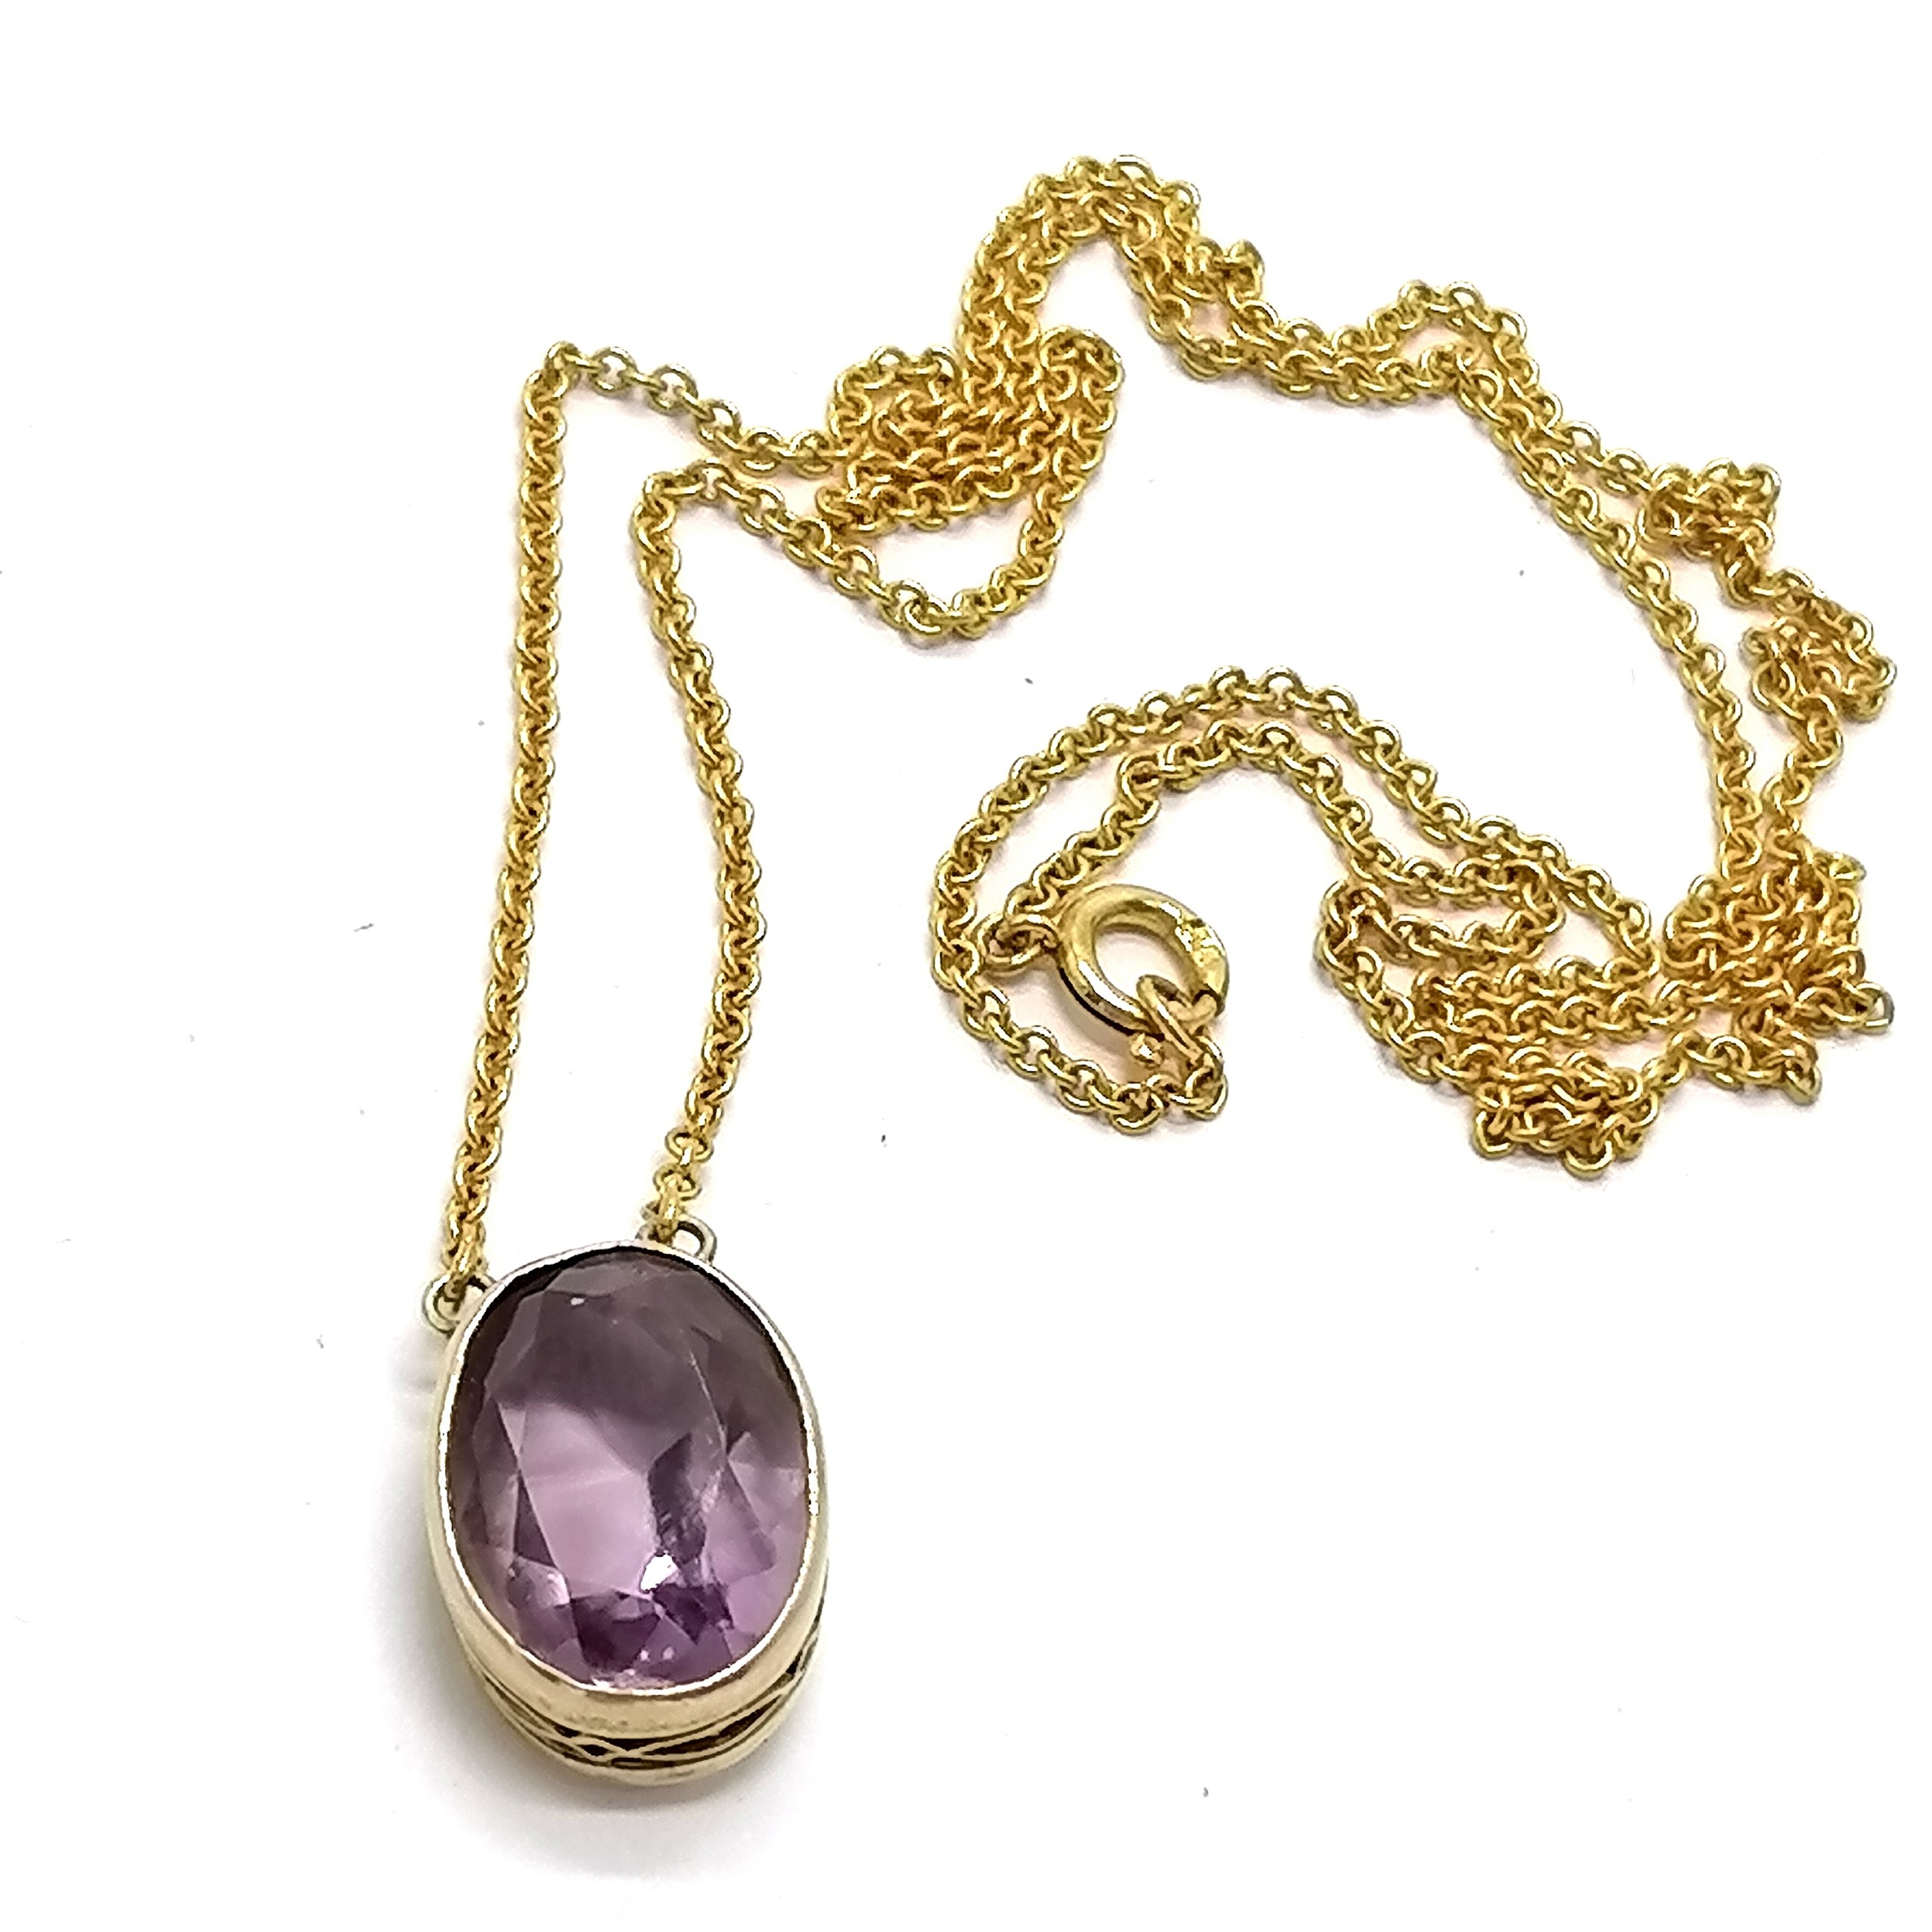 Amethyst pendant on a gold 50cm chain with a 9ct gold clasp - total weight 6g